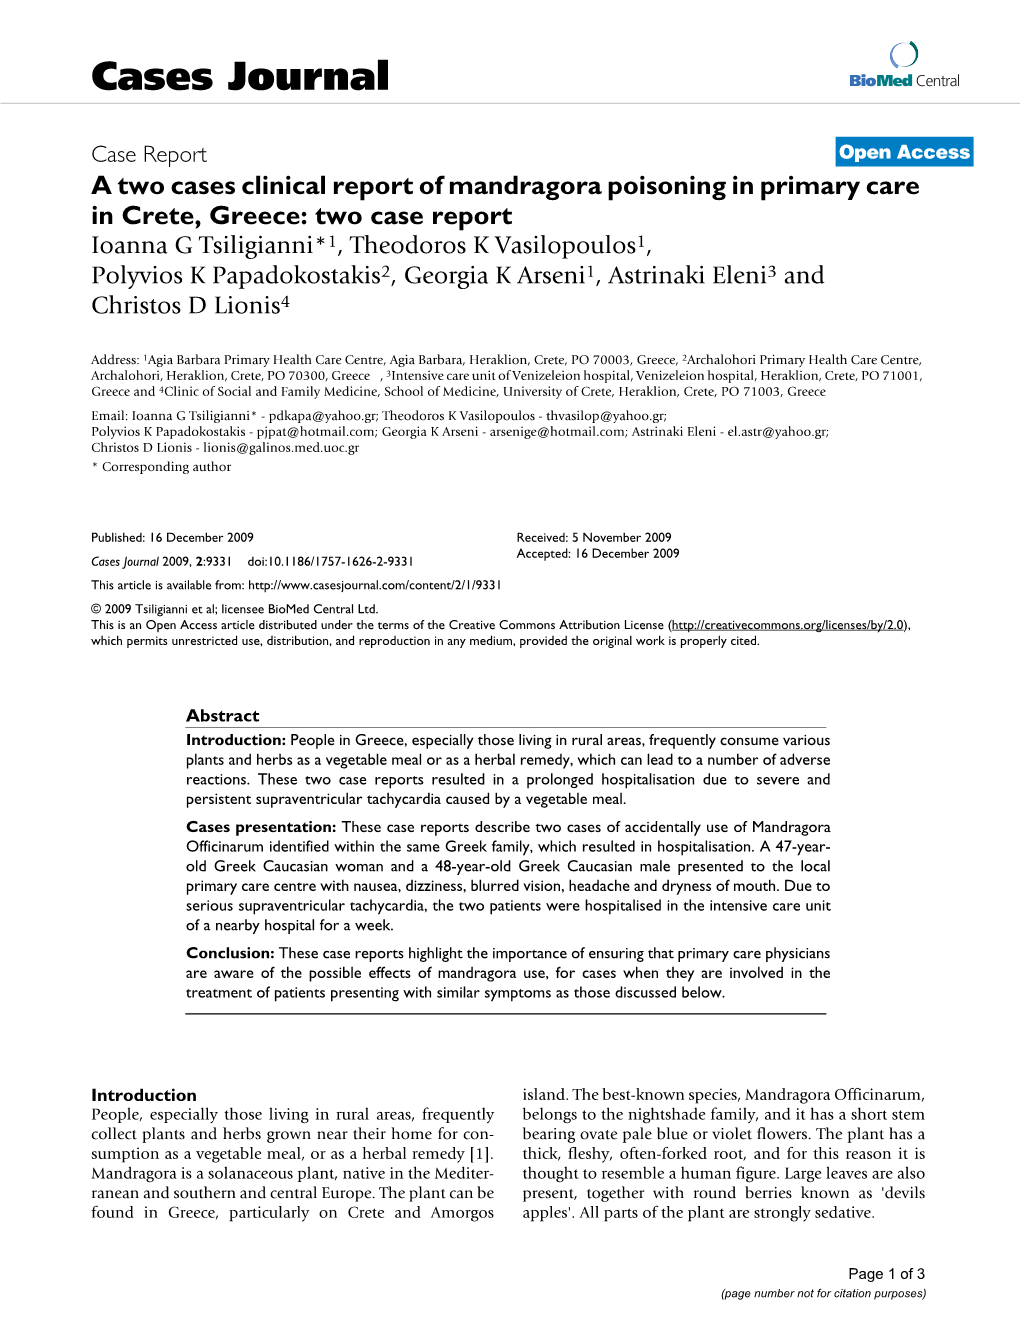 A Two Cases Clinical Report of Mandragora Poisoning in Primary